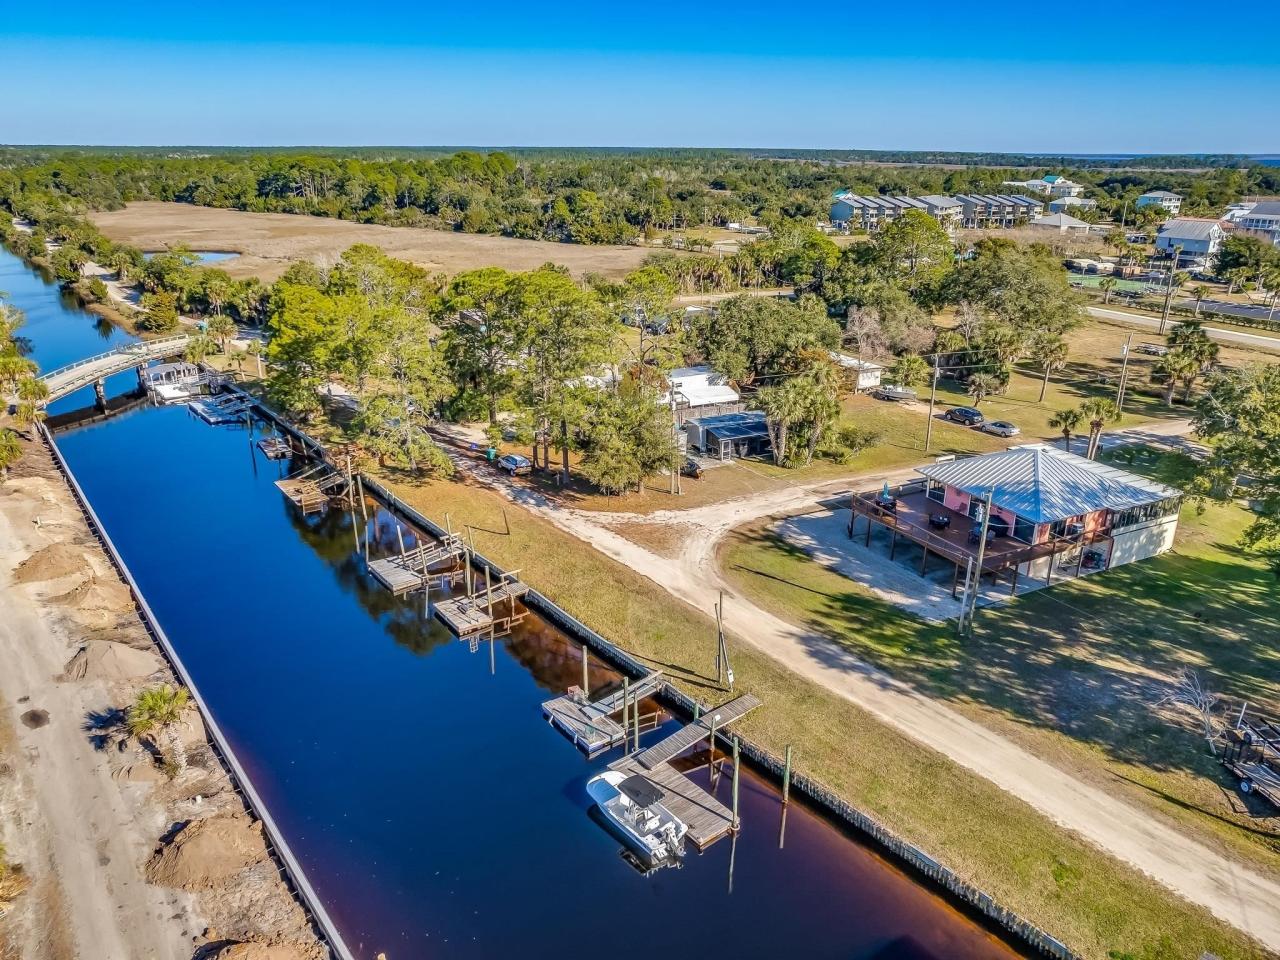  Maps and Schools 5 Rising Tide Way, CRAWFORDVILLE, FL 32327: Homes for Sale - Hommati  61fd0676ebcf4ad2bb024cce97e6802f